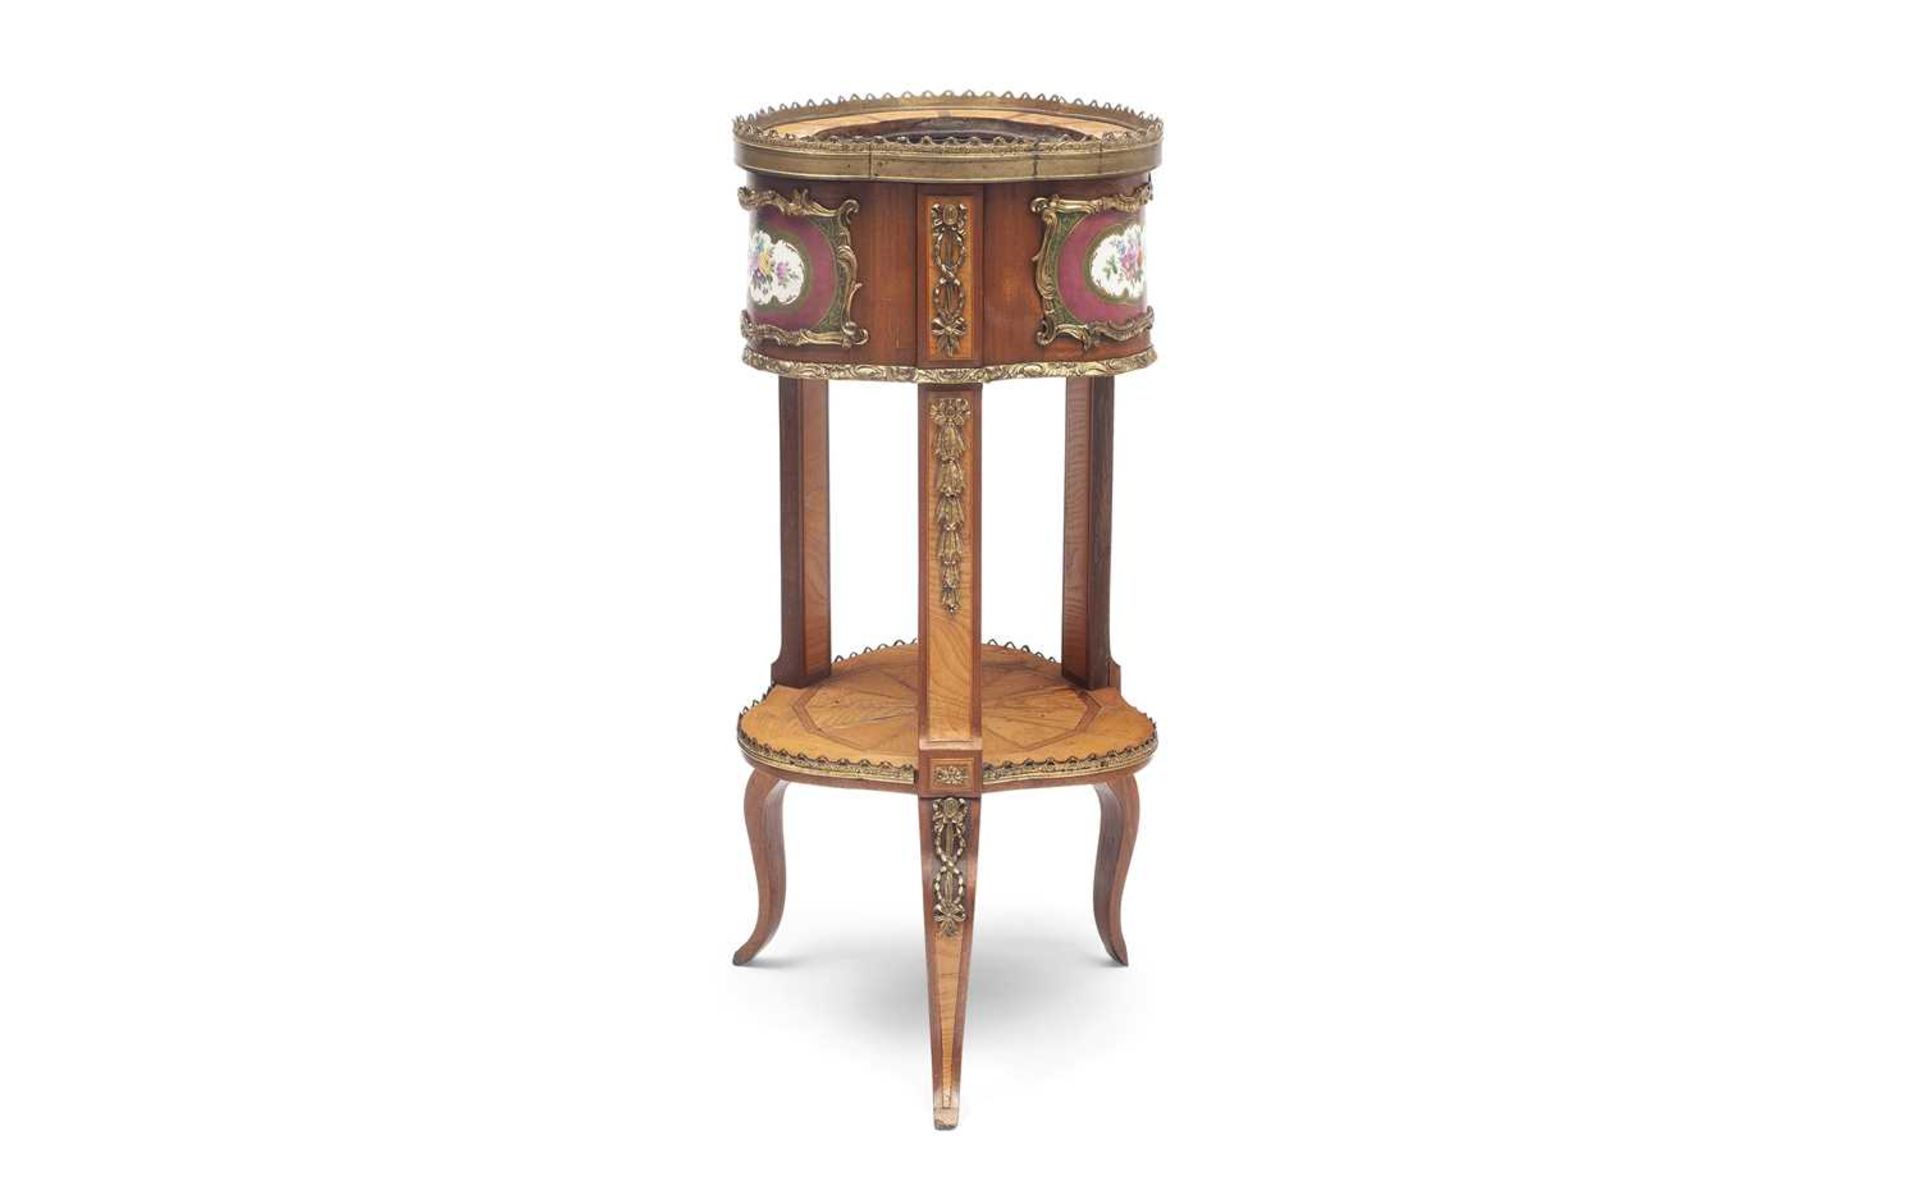 A LATE 19TH CENTURY FRENCH GILT METAL AND PORCELAIN MOUNTED JARDINIERE STAND